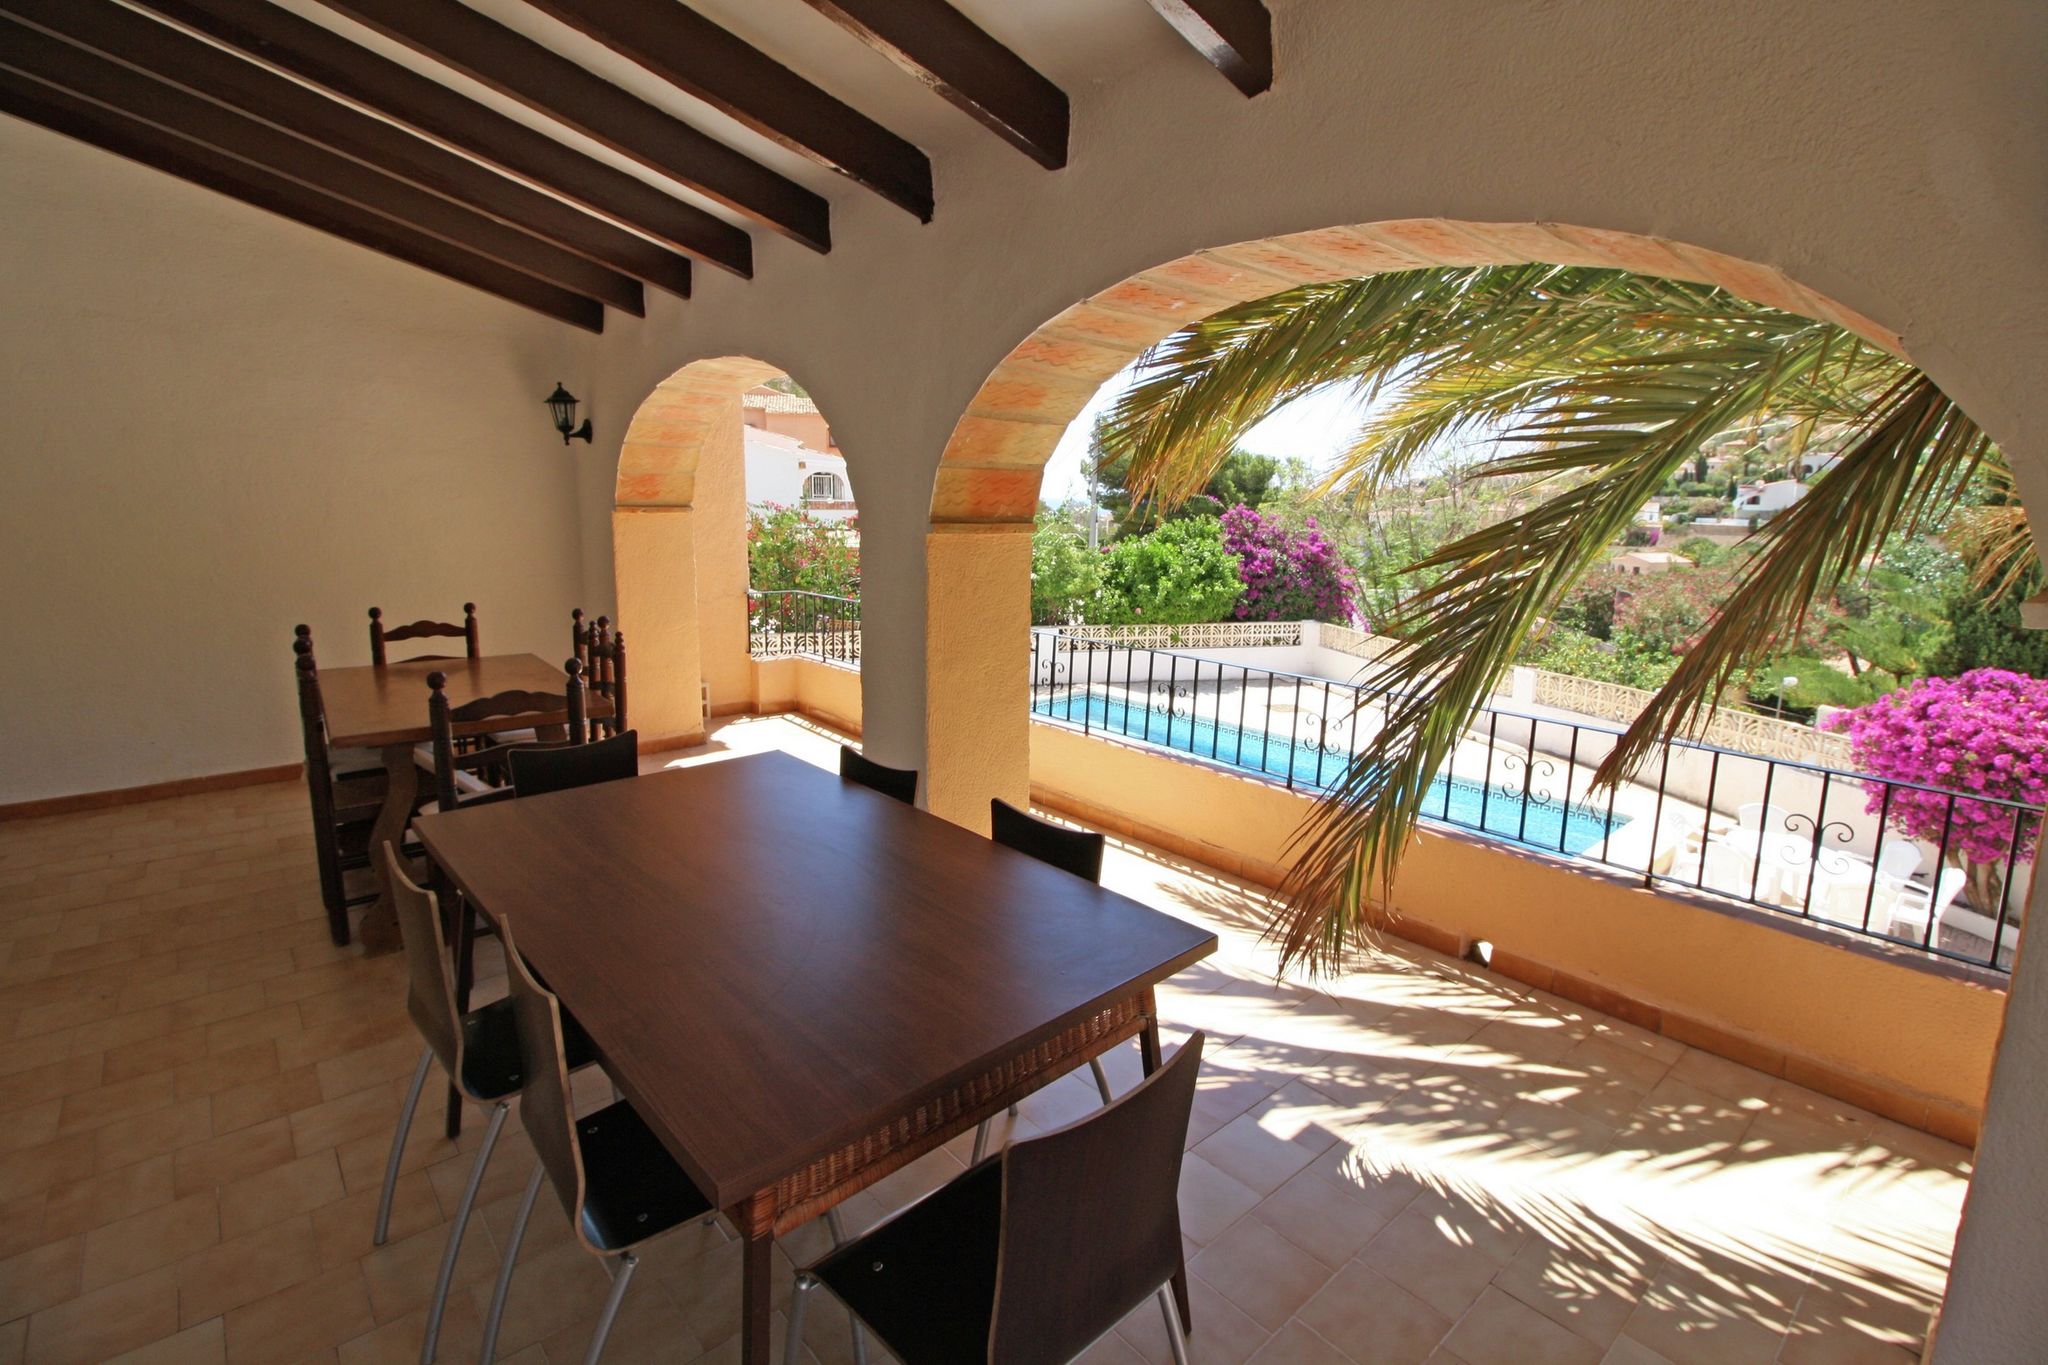 Detached villa with private swimming pool in Calpe for families and groups